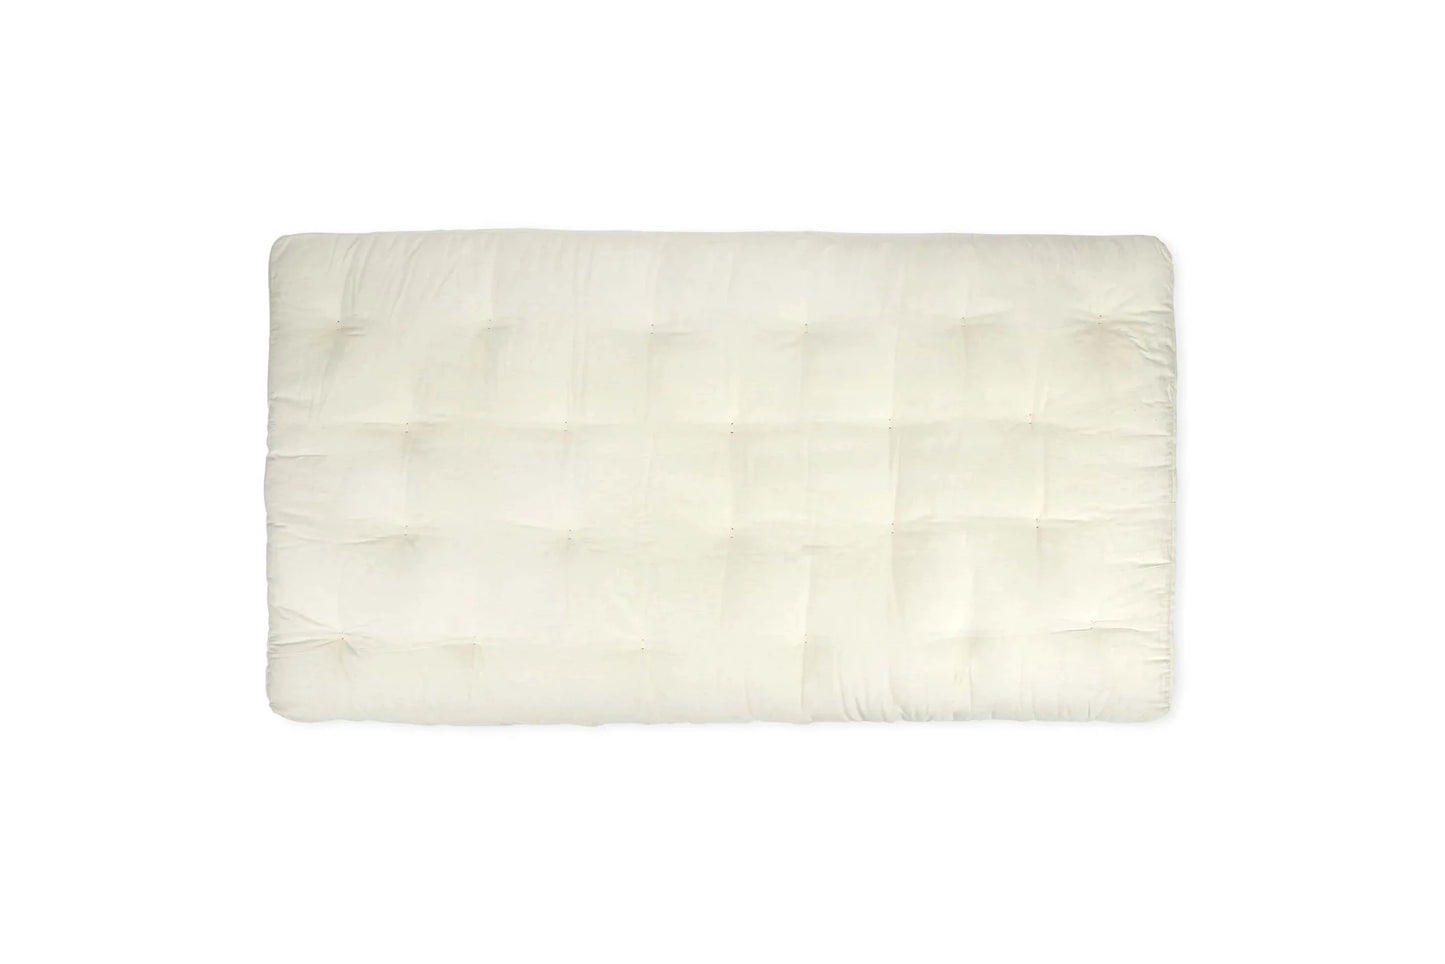 Extra Firm Natural Cotton with Wool Hand-Made Old Fashion Style Futon Mattress